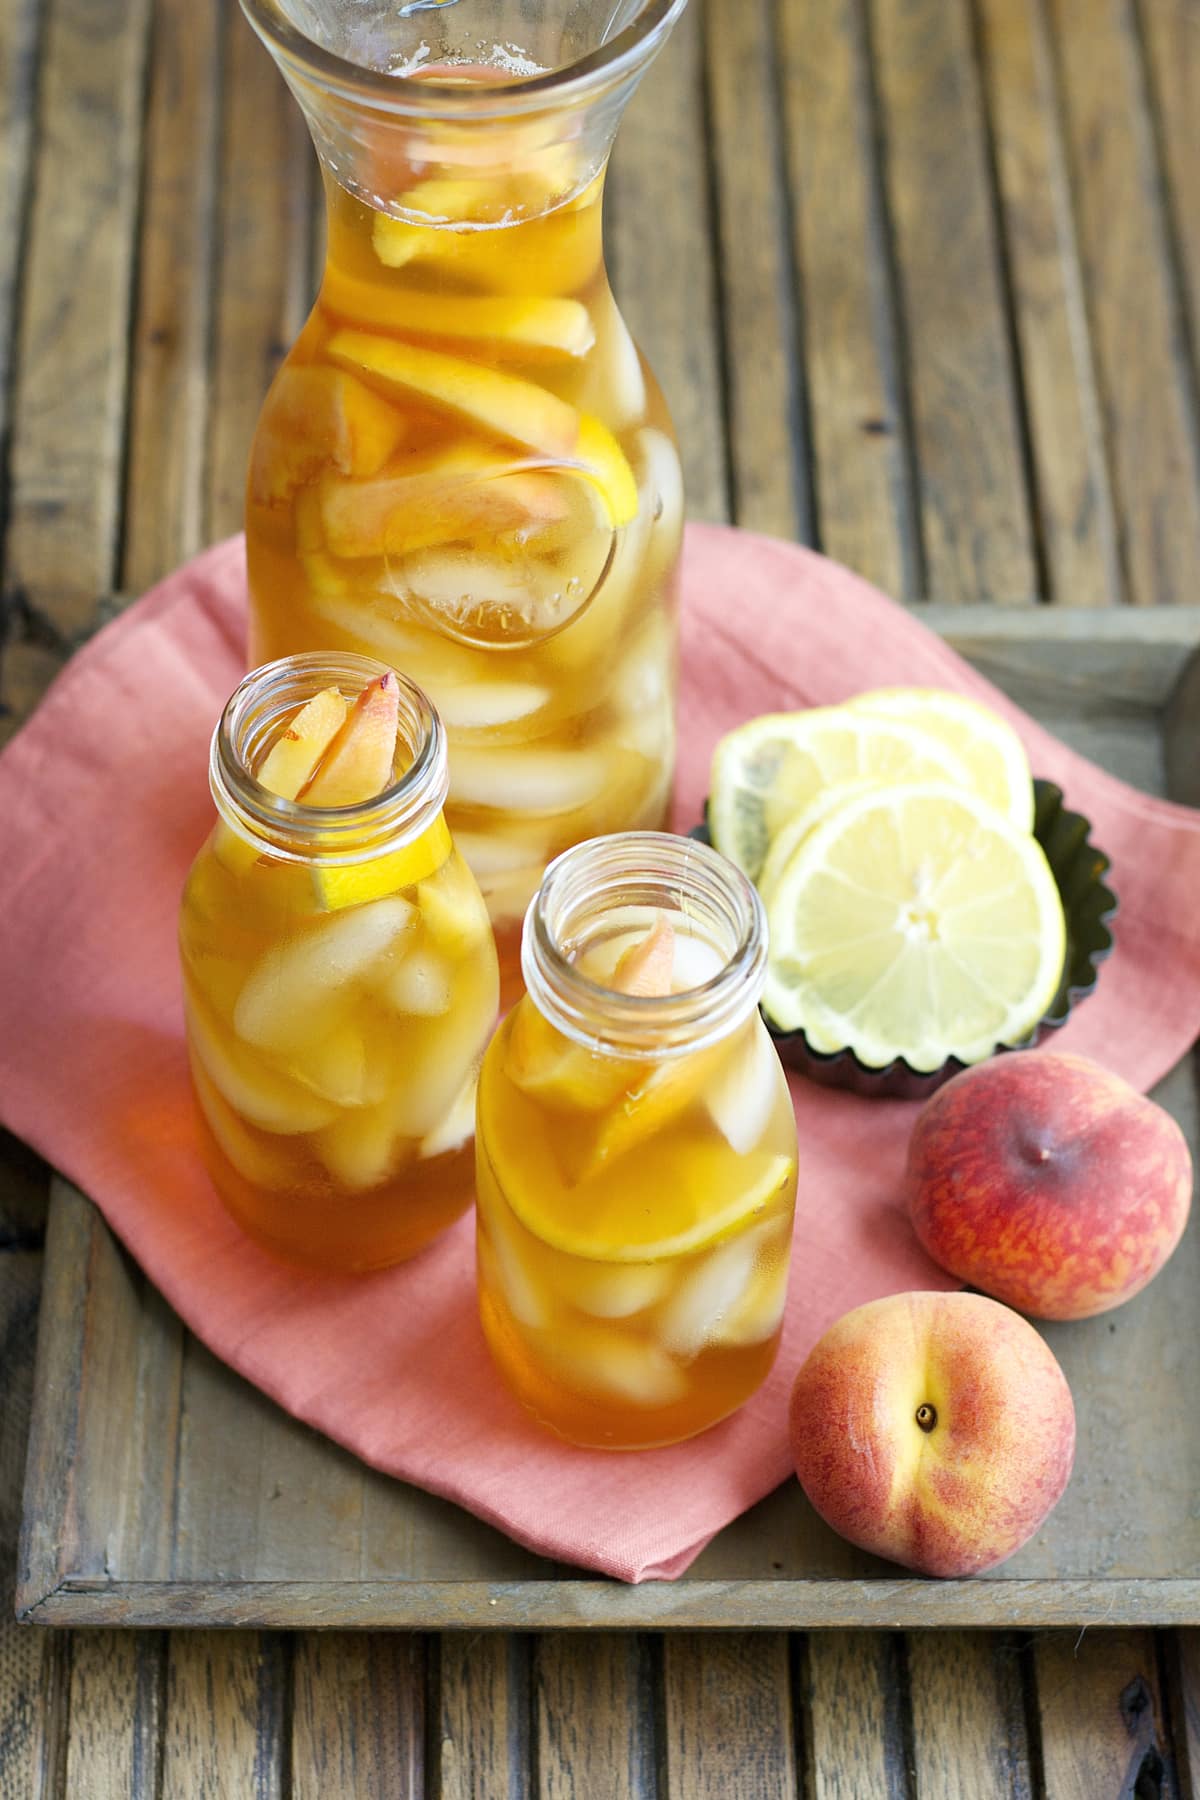 Sweet and refreshing Vanilla Peach Tea is the perfect Summer drink! Serve with fresh peach and lemon slices for simple Summer entertaining!